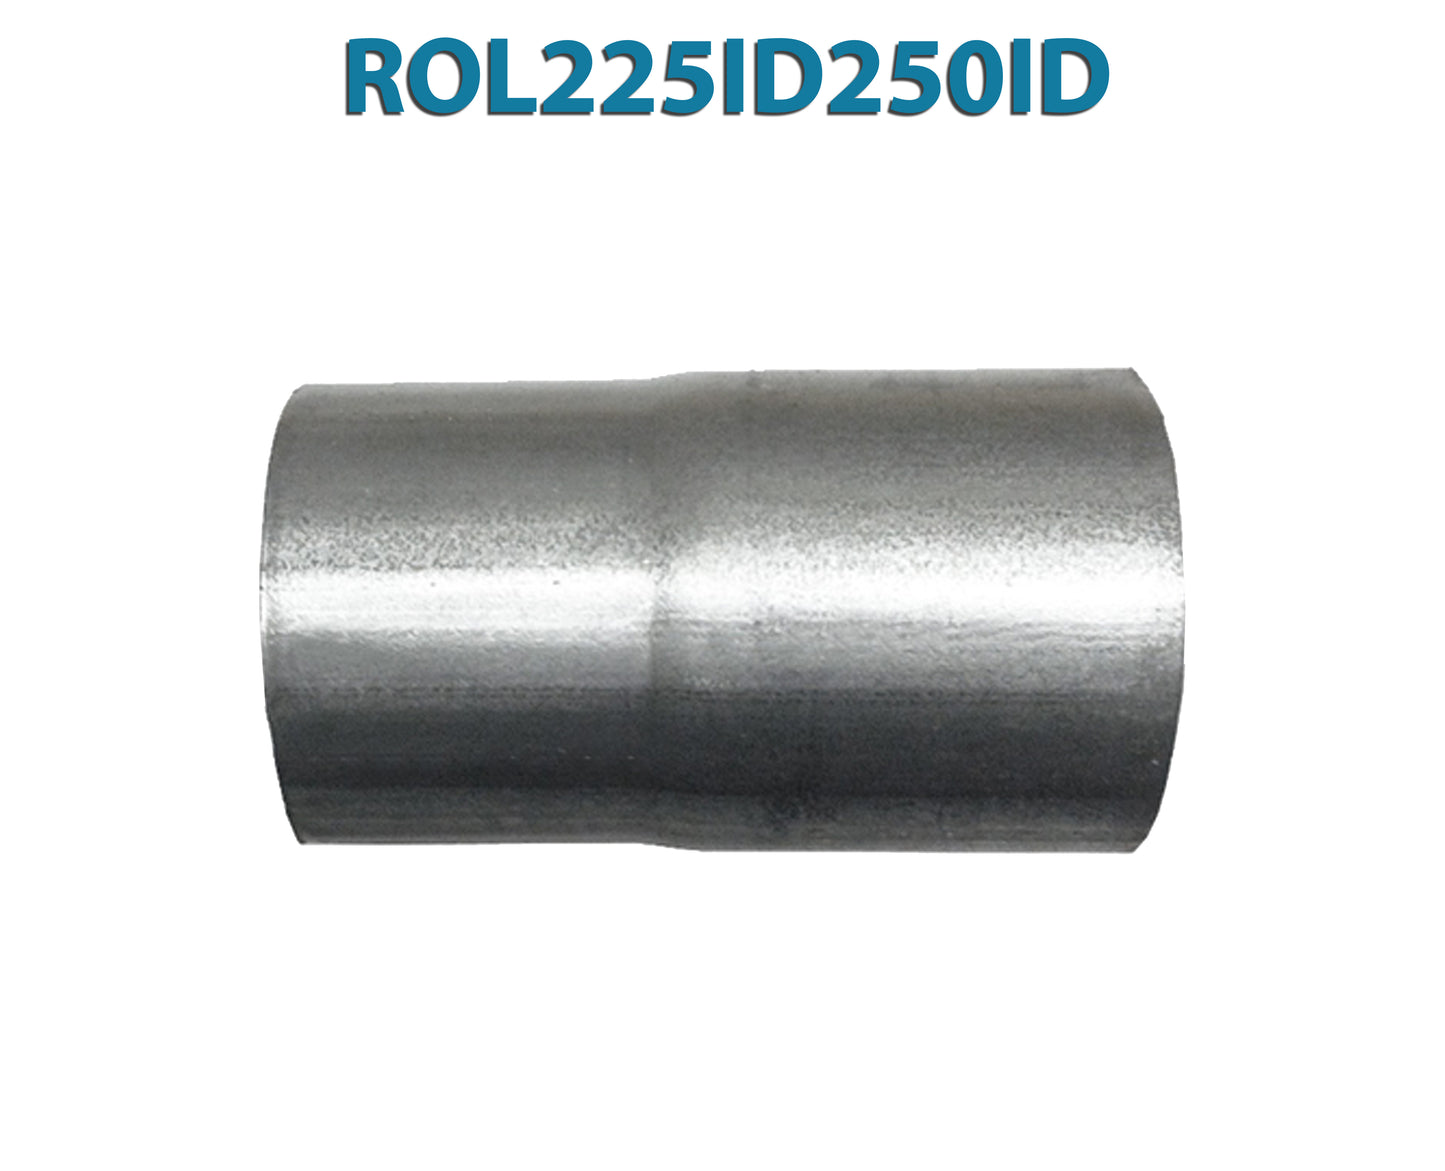 ROL225ID250ID 548522 2 1/4” ID to 2 1/2” ID Universal Exhaust Pipe to Pipe Adapter Reducer